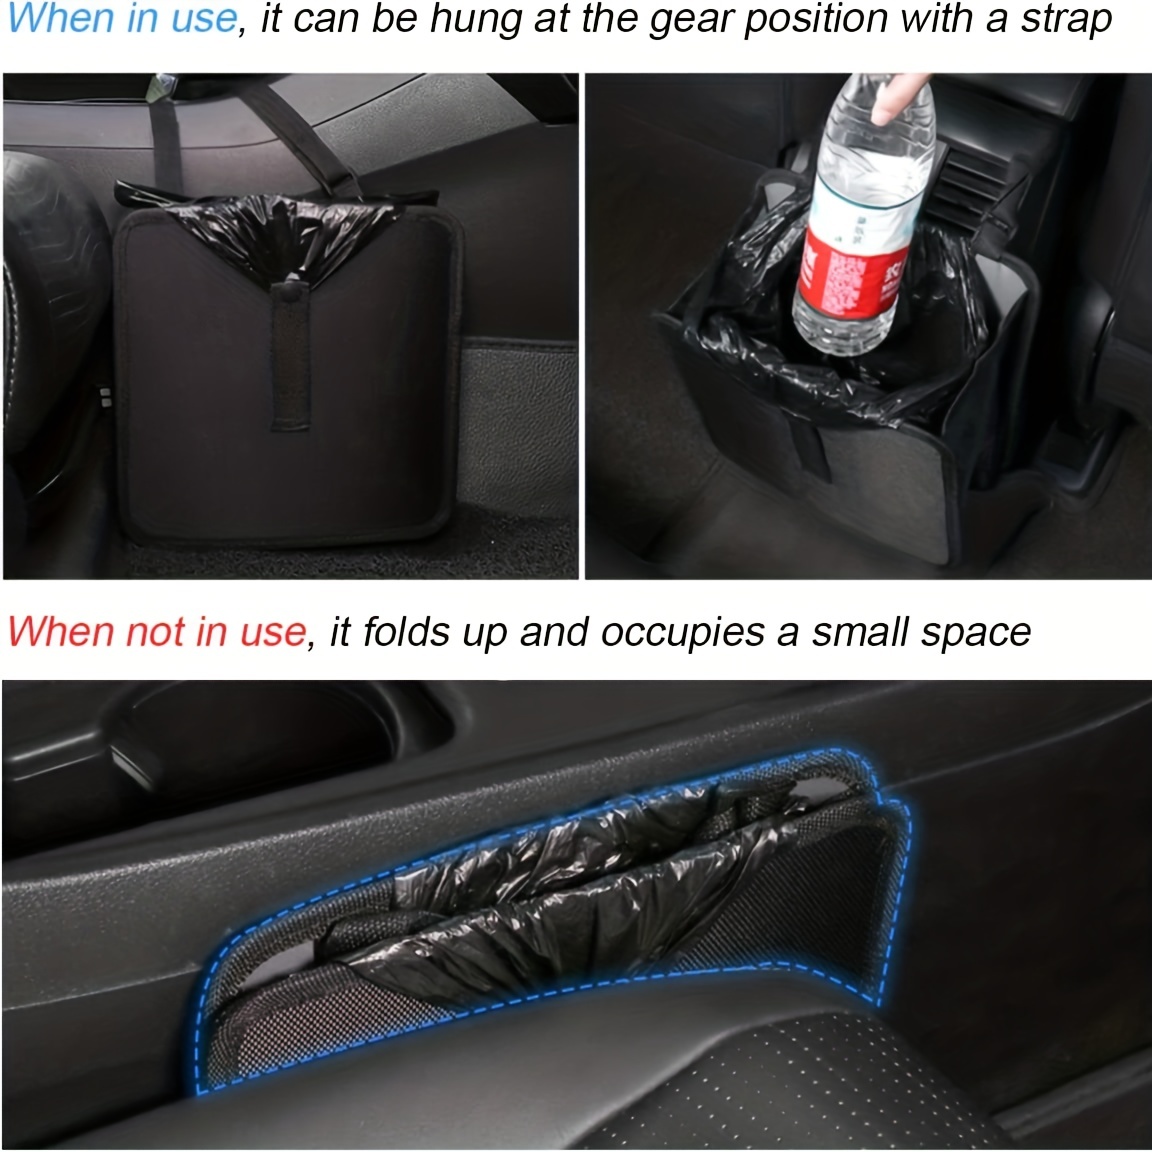 2x In-Car Trash Can Washable Leakproof Seatback Hanging Garbage